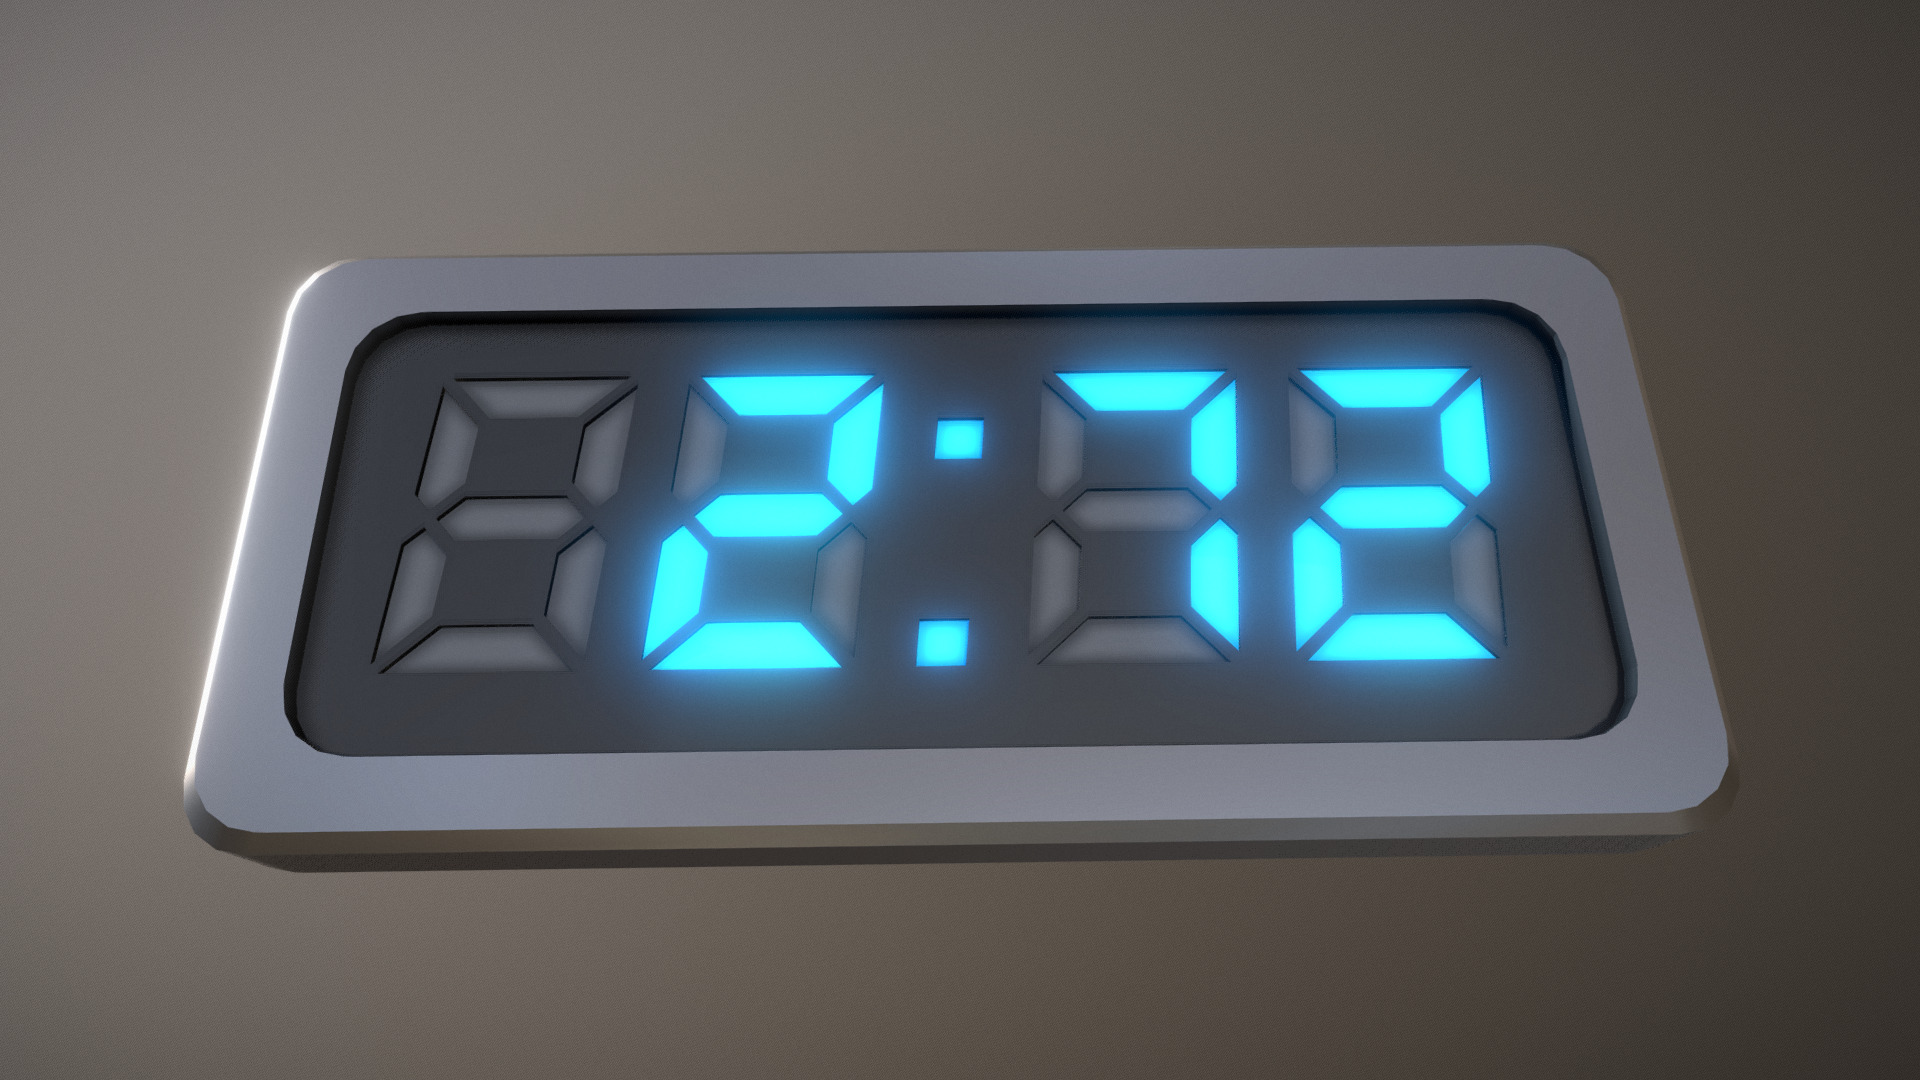 3D model Video Countdown 5-4-3-2-1 (Simple) - This is a 3D model of the Video Countdown 5-4-3-2-1 (Simple). The 3D model is about a white digital clock.